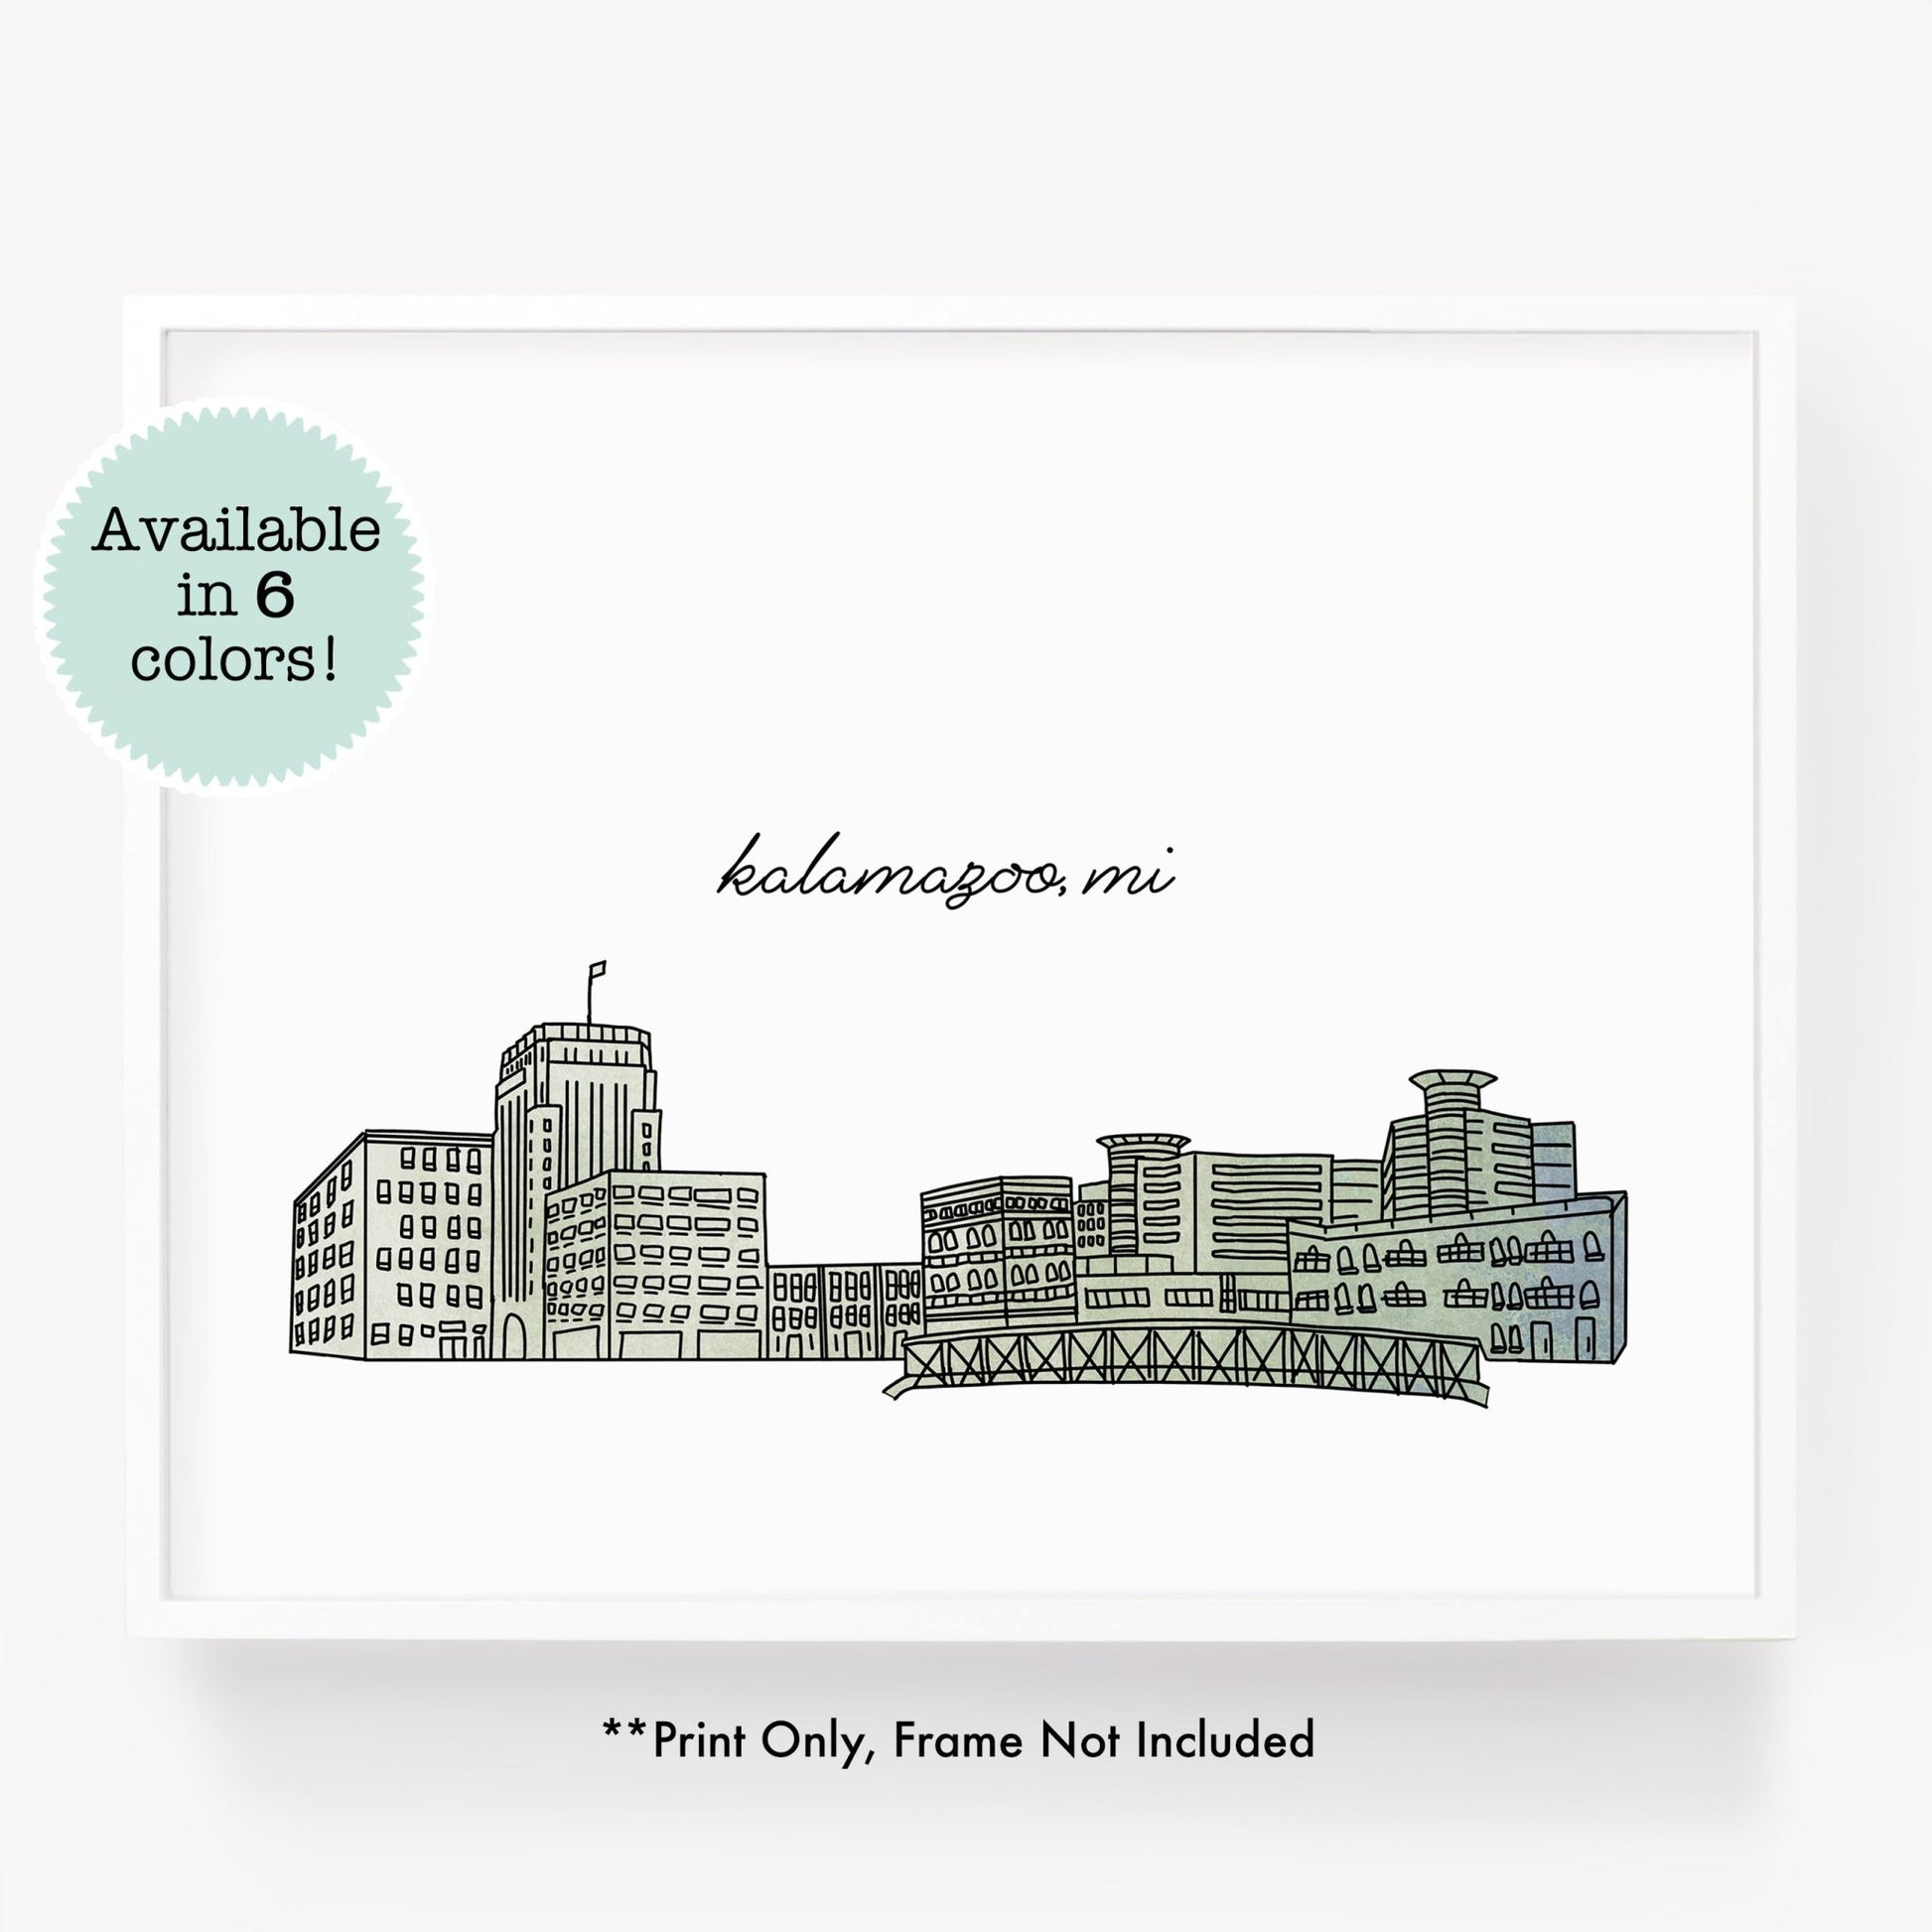 A city art print of a skyline drawing of Kalamazoo Michigan - in the color green